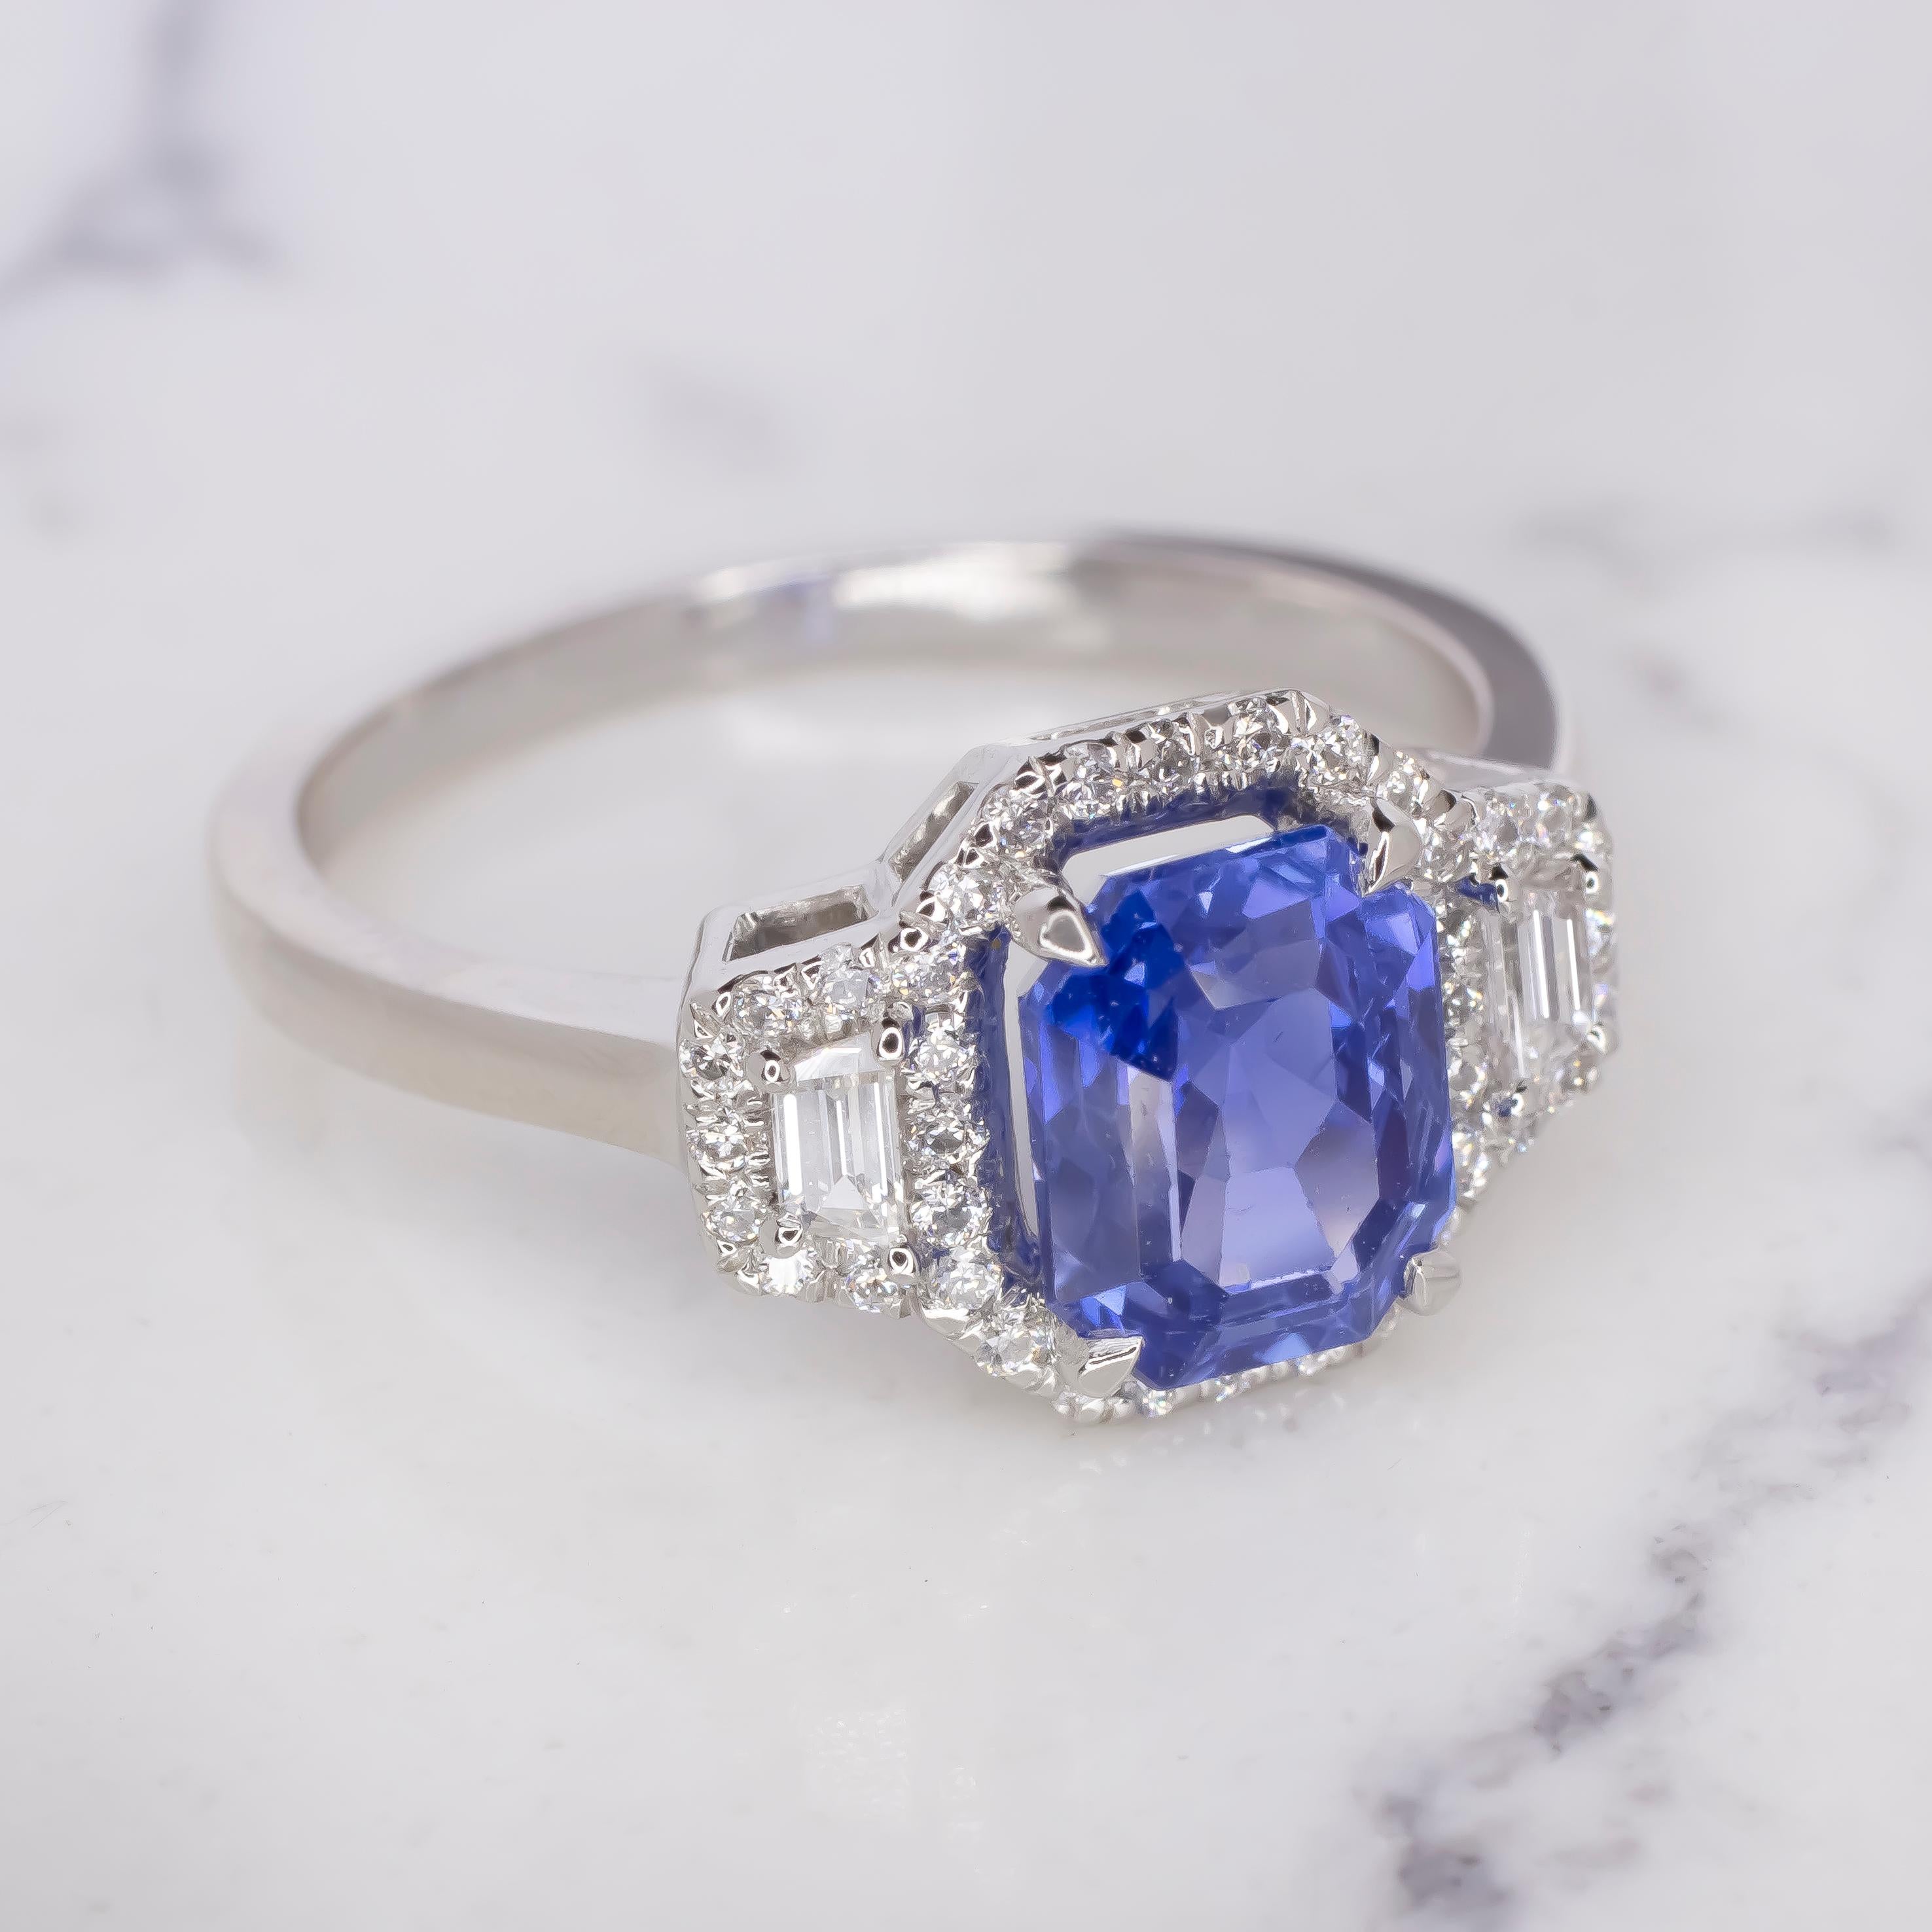 An exquisite sapphire ring! 

The color of the main stone of the ring is amazing and cut is excellent. 
I hardly find such lively and sparkly blue sapphires without any treatment!

Designer: Antinori Di Sanpietro
Material: platinum
Main stone: 1